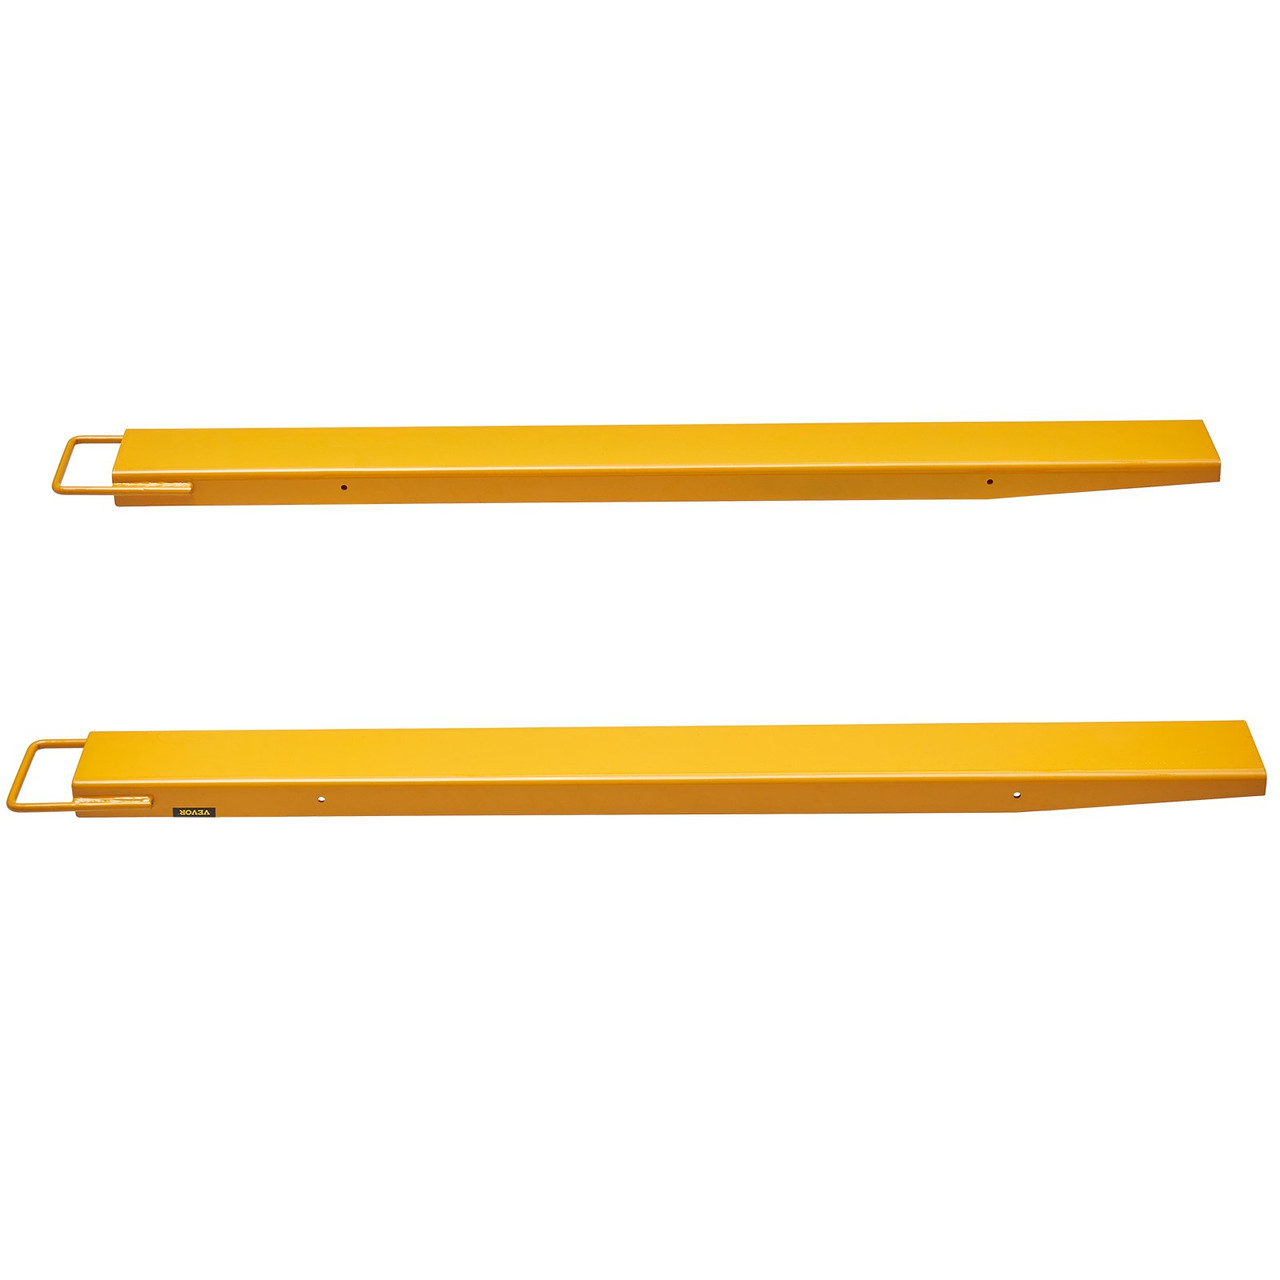 VEVOR Pallet Fork Extensions, 60" Length 4.5" Width, Heavy Duty Carbon Steel Fork Extensions for Forklifts, 1 Pair Forklift Extensions, Industrial Forklift Fork Attachments for Forklift Truck, Yellow